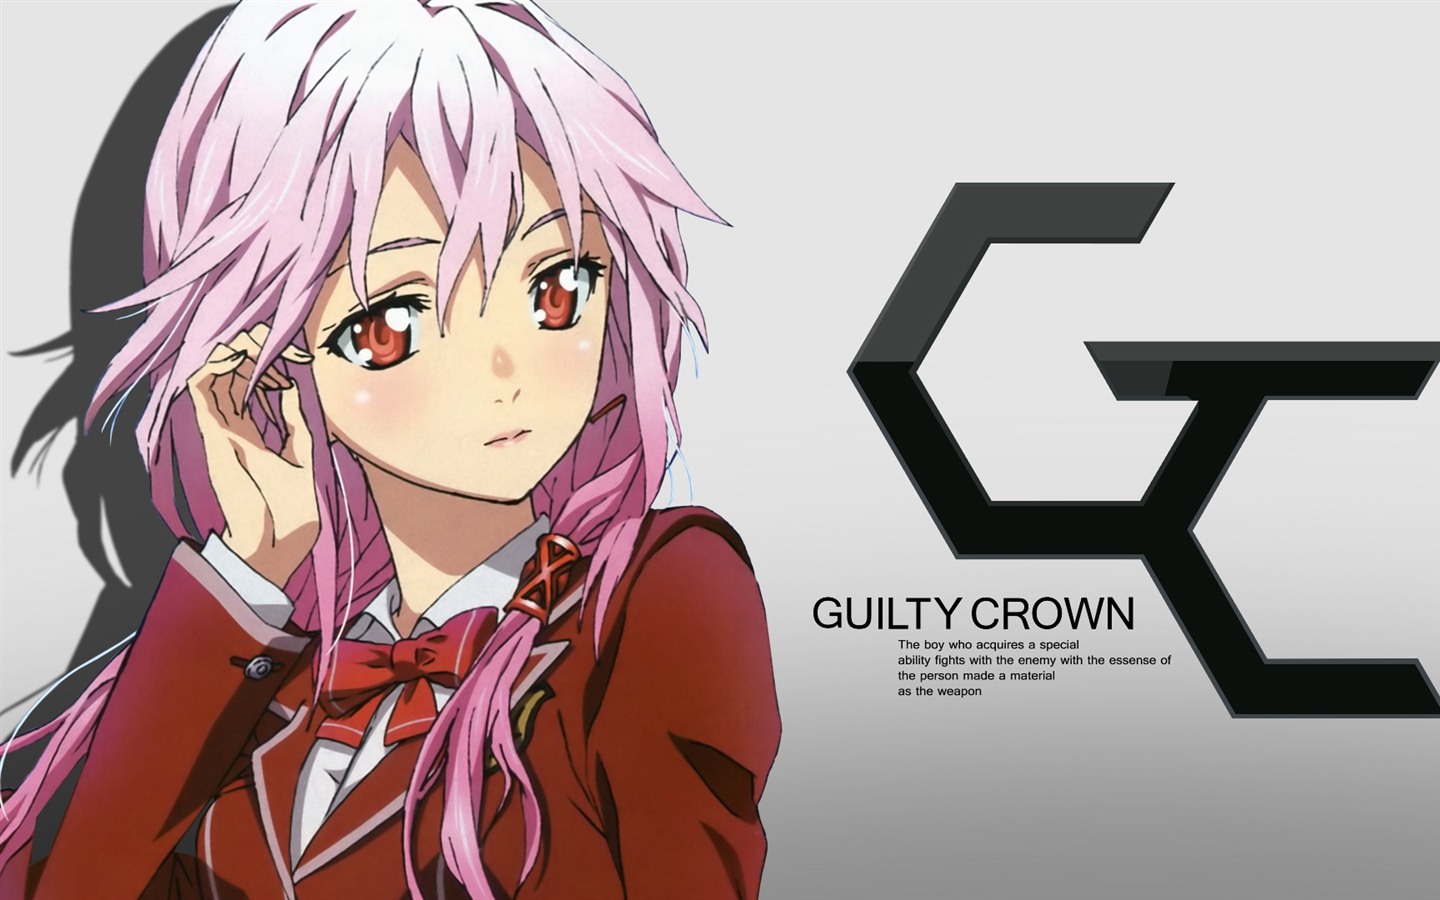 Guilty Crown 罪恶王冠 高清壁纸8 - 1440x900